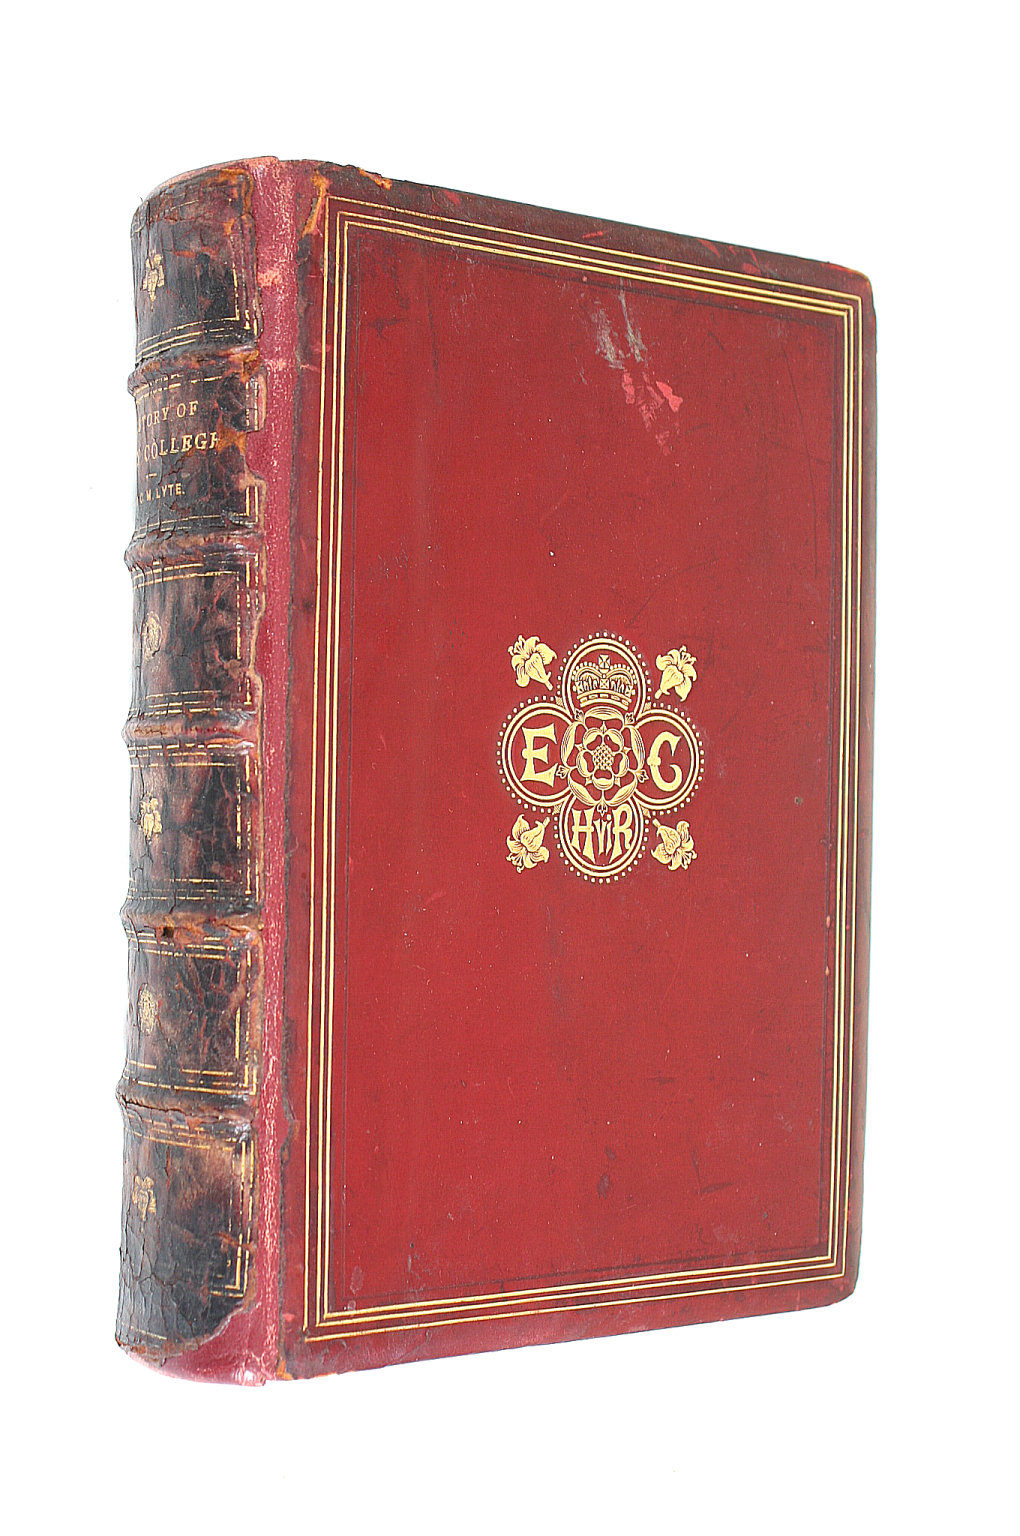 H. C. MAXWELL LYTE - A History of Eton College 1440-1884